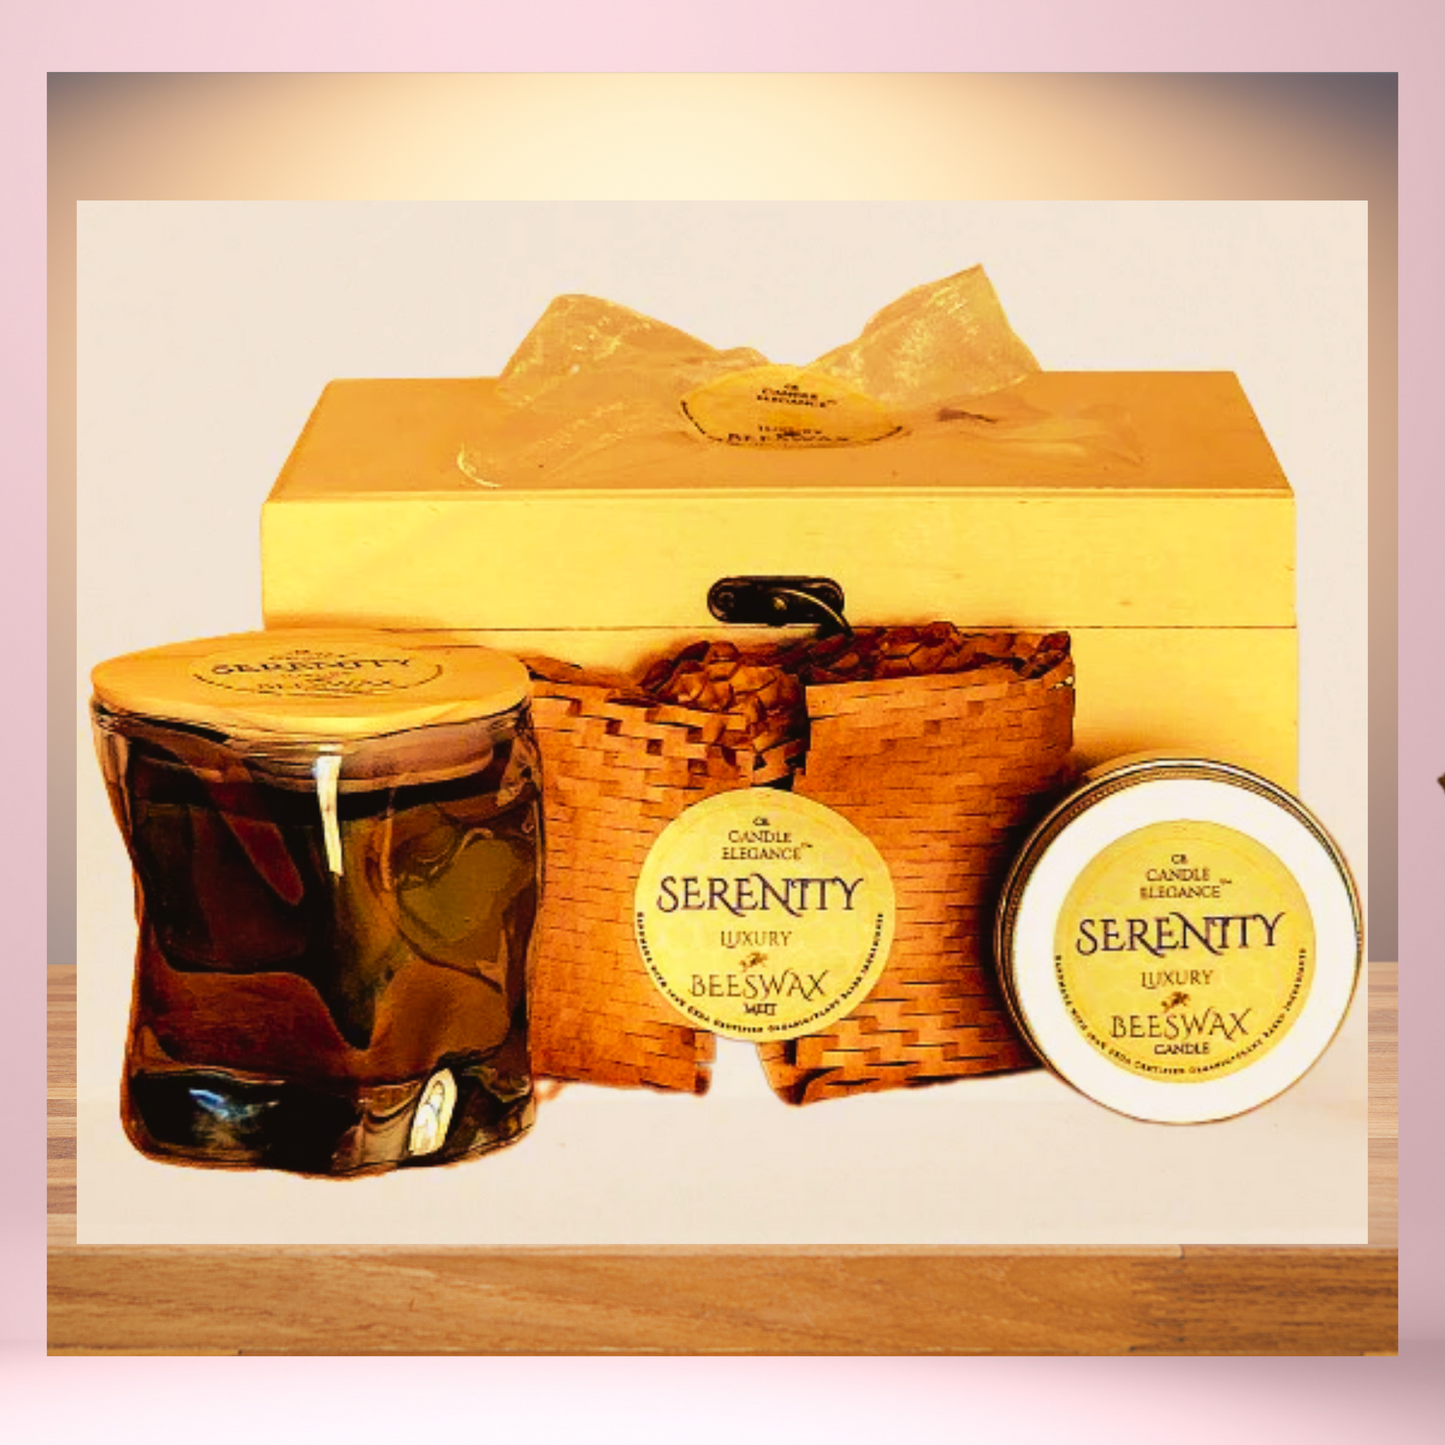 The Serenity Trio Gift Box Set is a carefully crafted scent experience that features eucalyptus, niaouli, and lavender. The top note of eucalyptus provides a lemony refreshment from Brazil, while the middle note of niaouli has a sweet and fresh camphoraceious smell. The bottom note of lavender, used since ancient times, provides a rich floral scent.